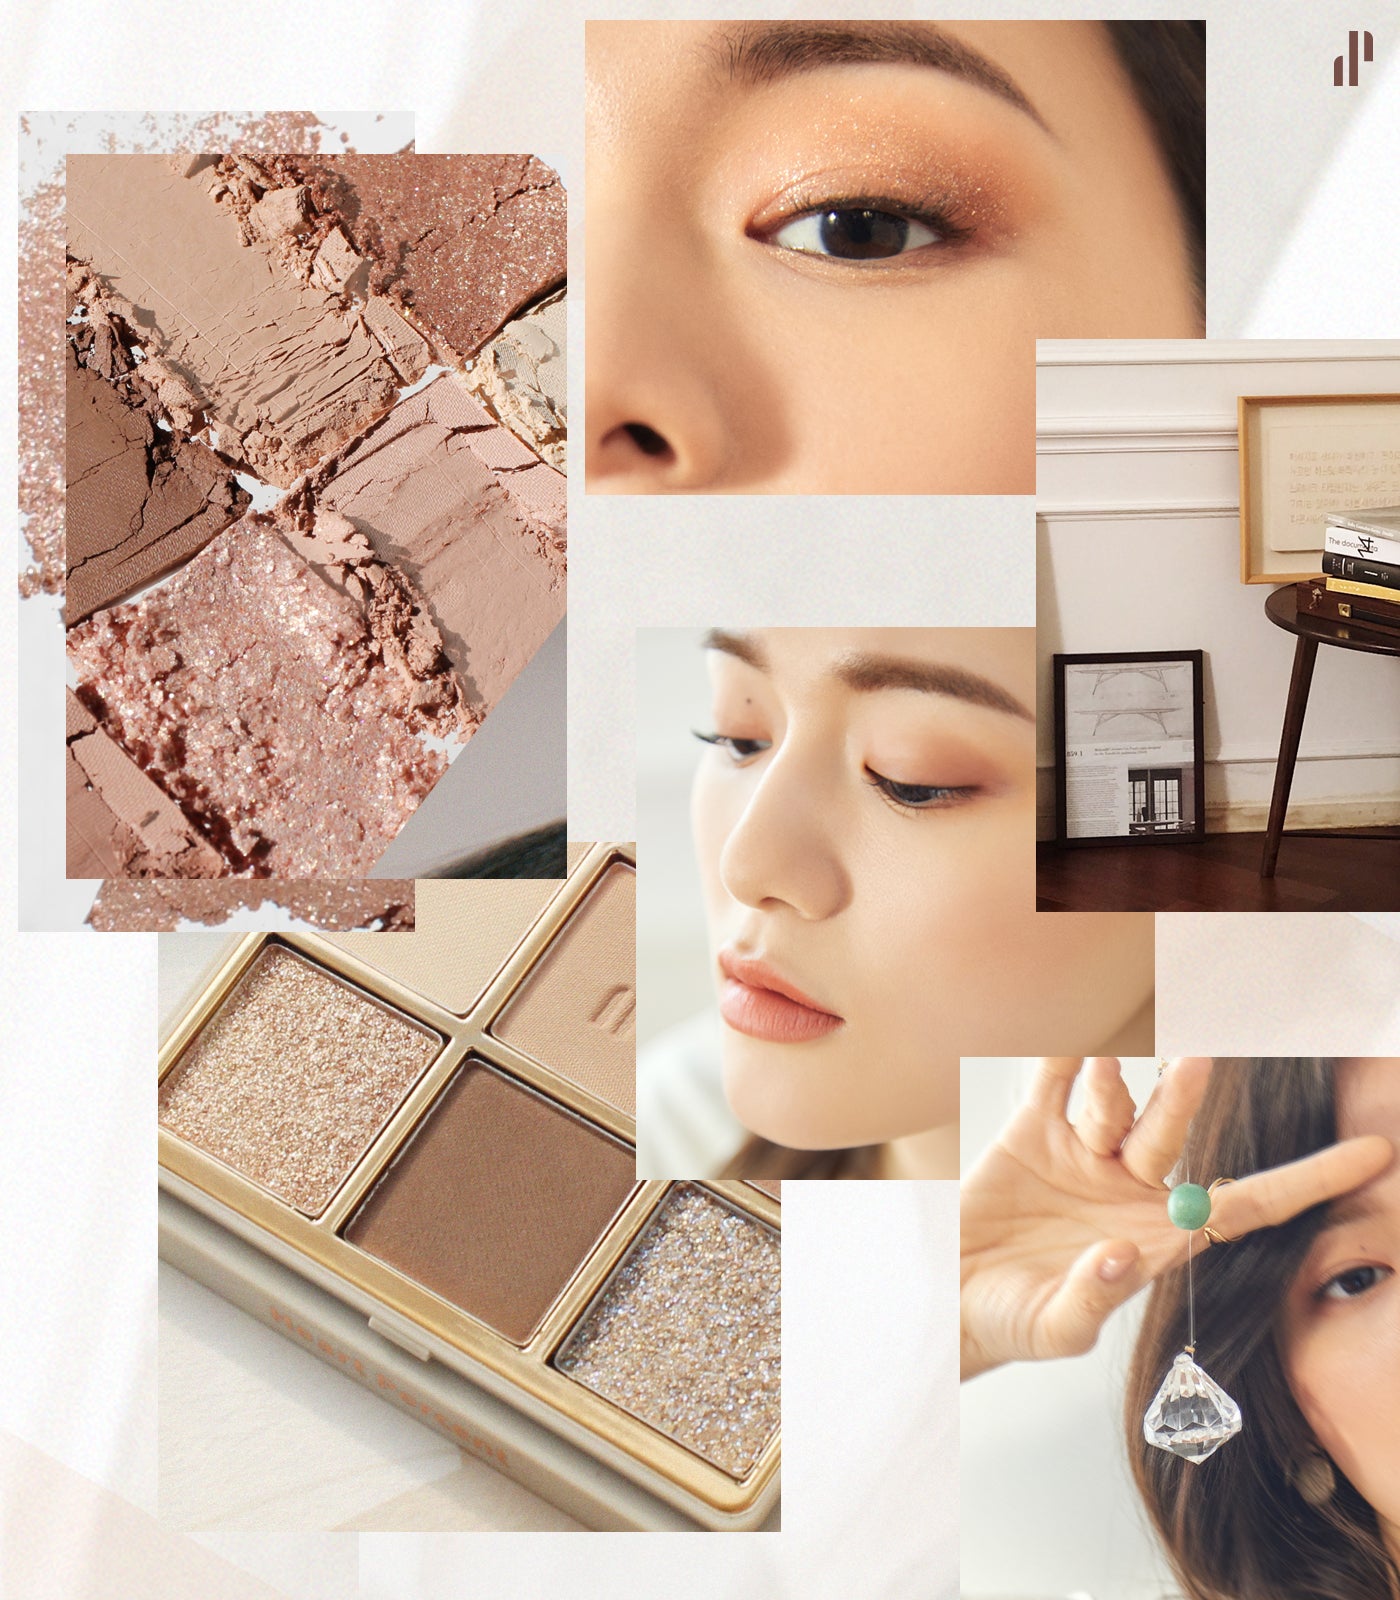 Heart Percent Dote On Mood Eye Palette, 04 Another Nude Facets